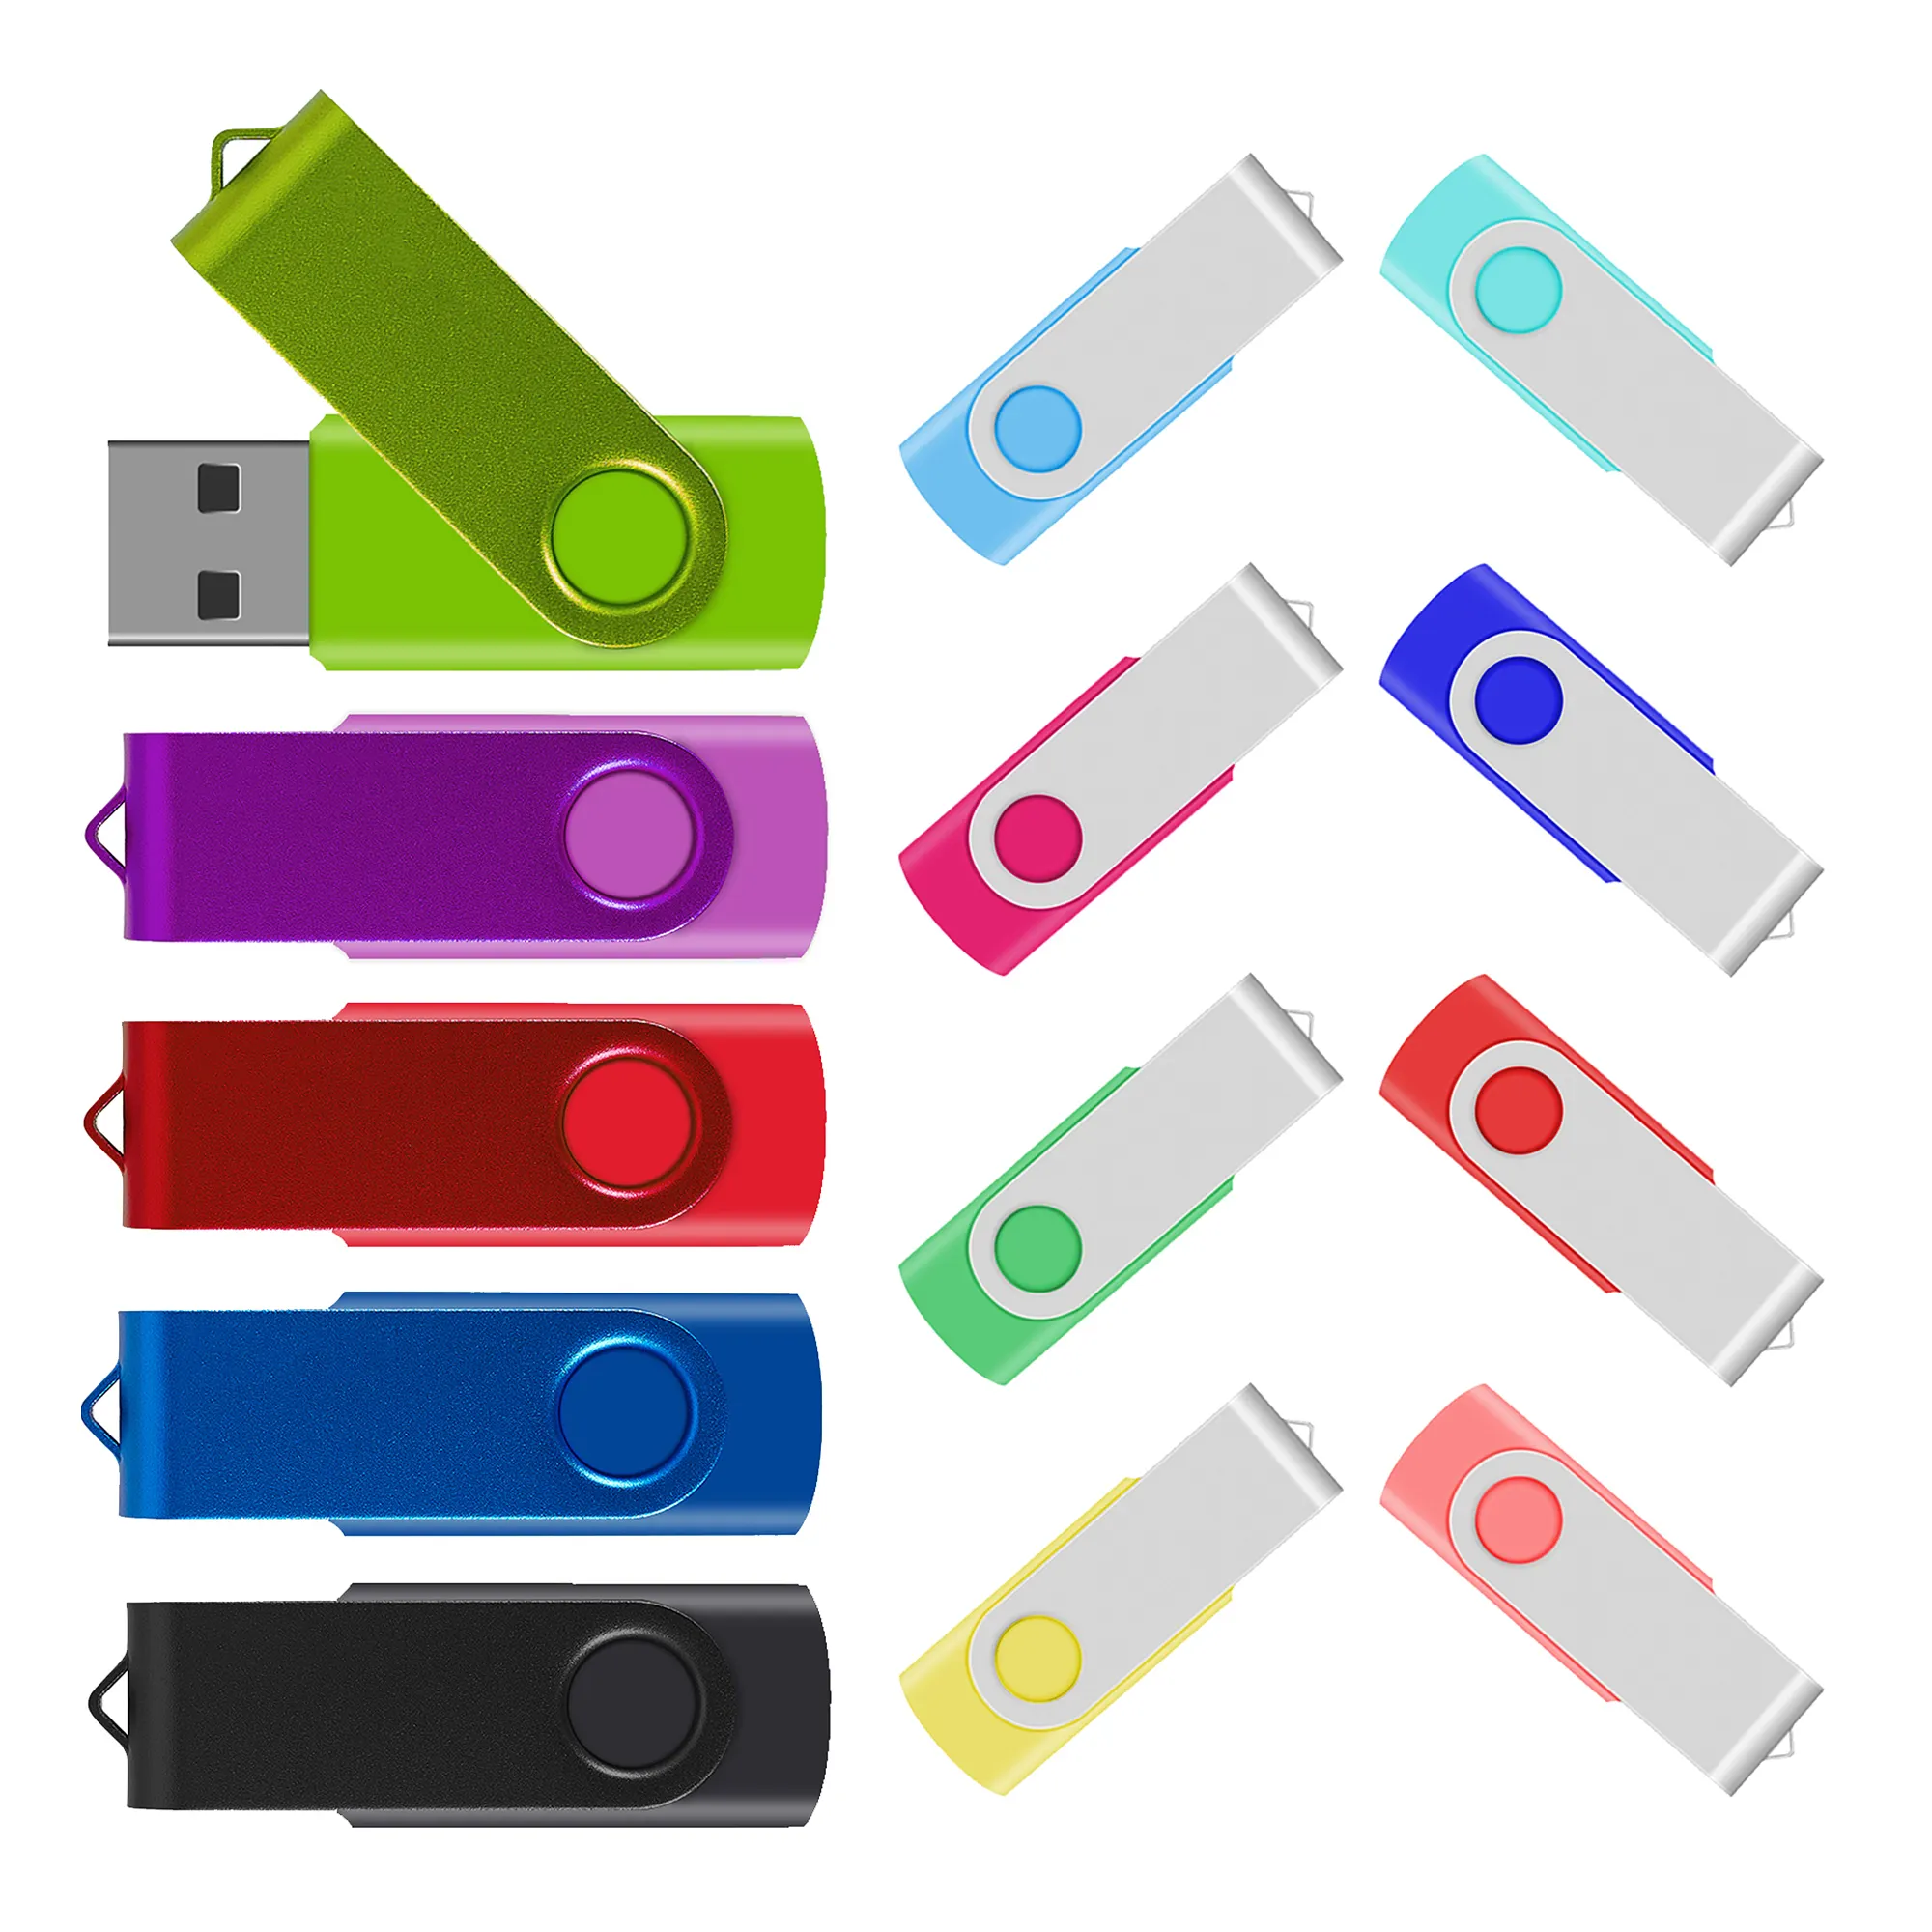 High-Quality High-Speed Cheap USB 2.0/3.0 Flash Drive Business/Gift Pen Drive Available in 4GB 8GB 16GB 32GB 64GB 128GB Sizes